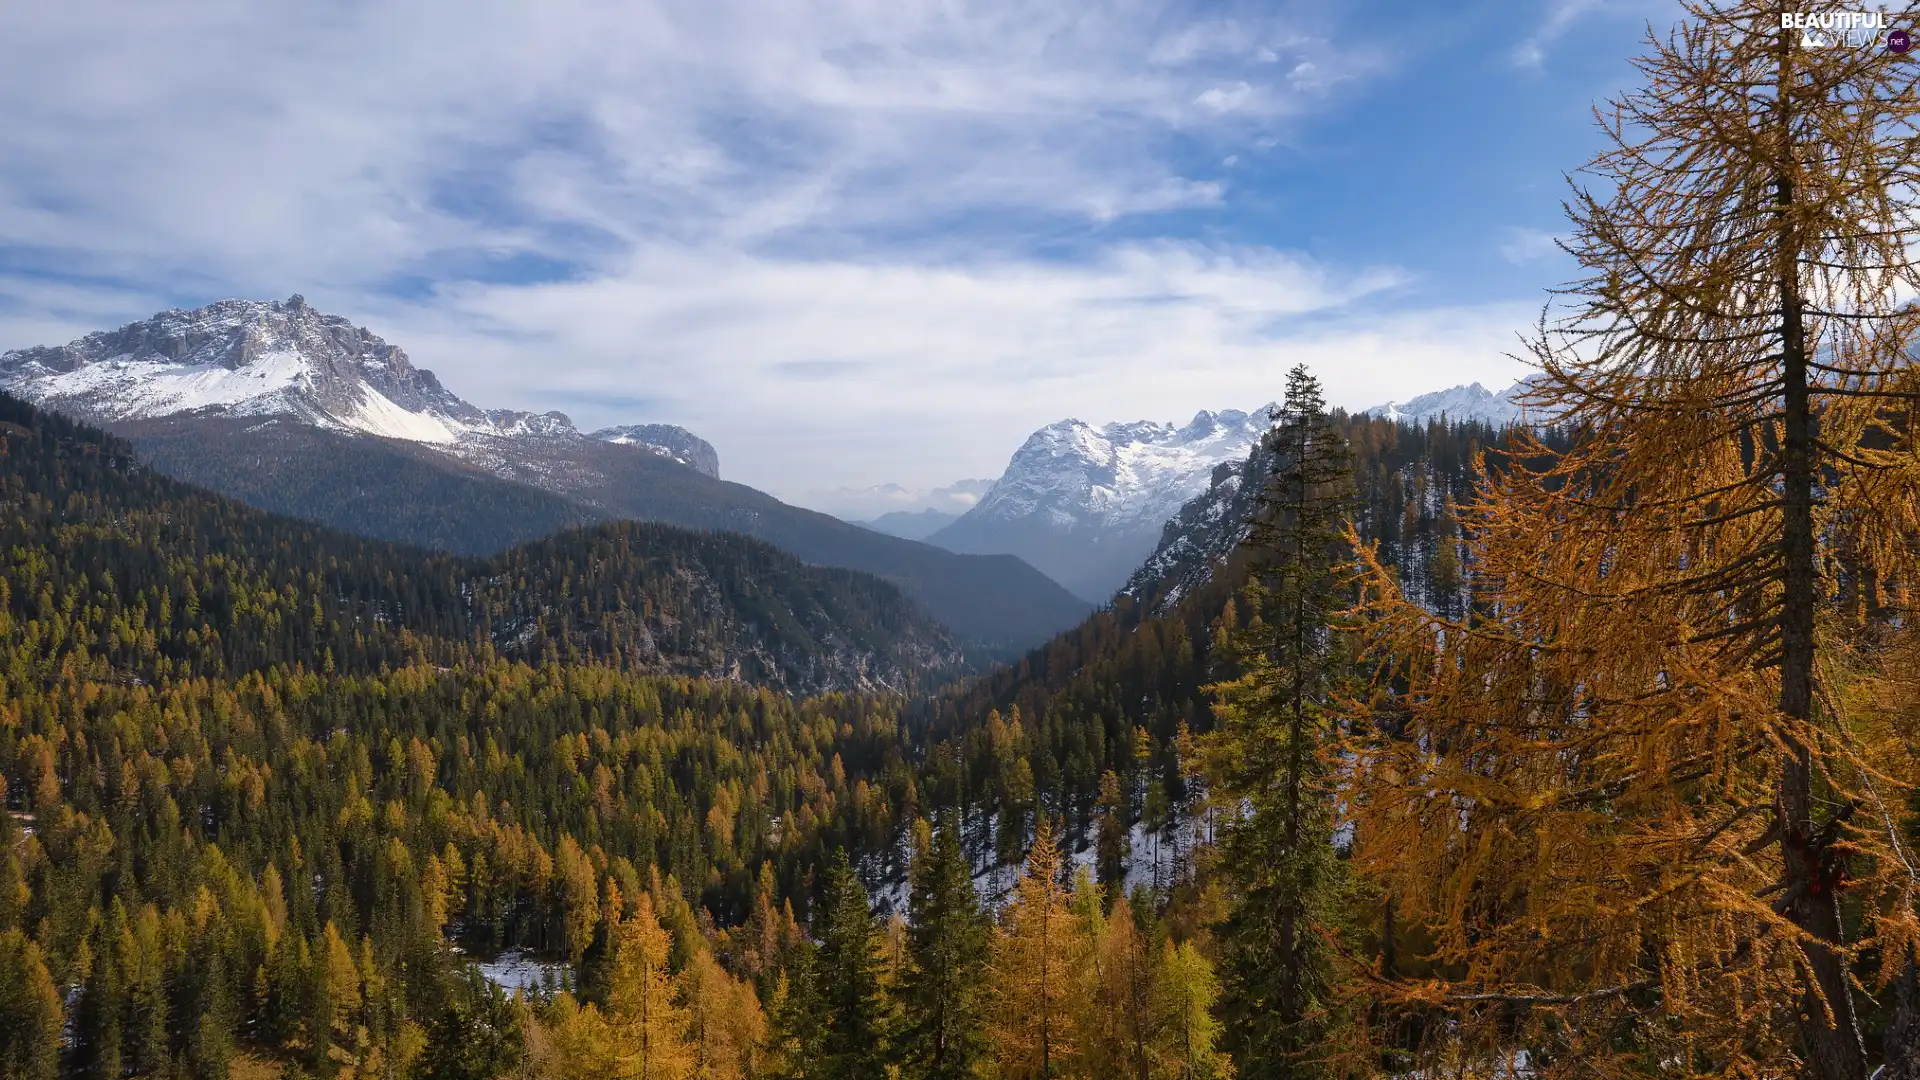 Dolomites, Snowy, woods, Valley, viewes, Italy, South Tyrol, Mountains, peaks, autumn, trees